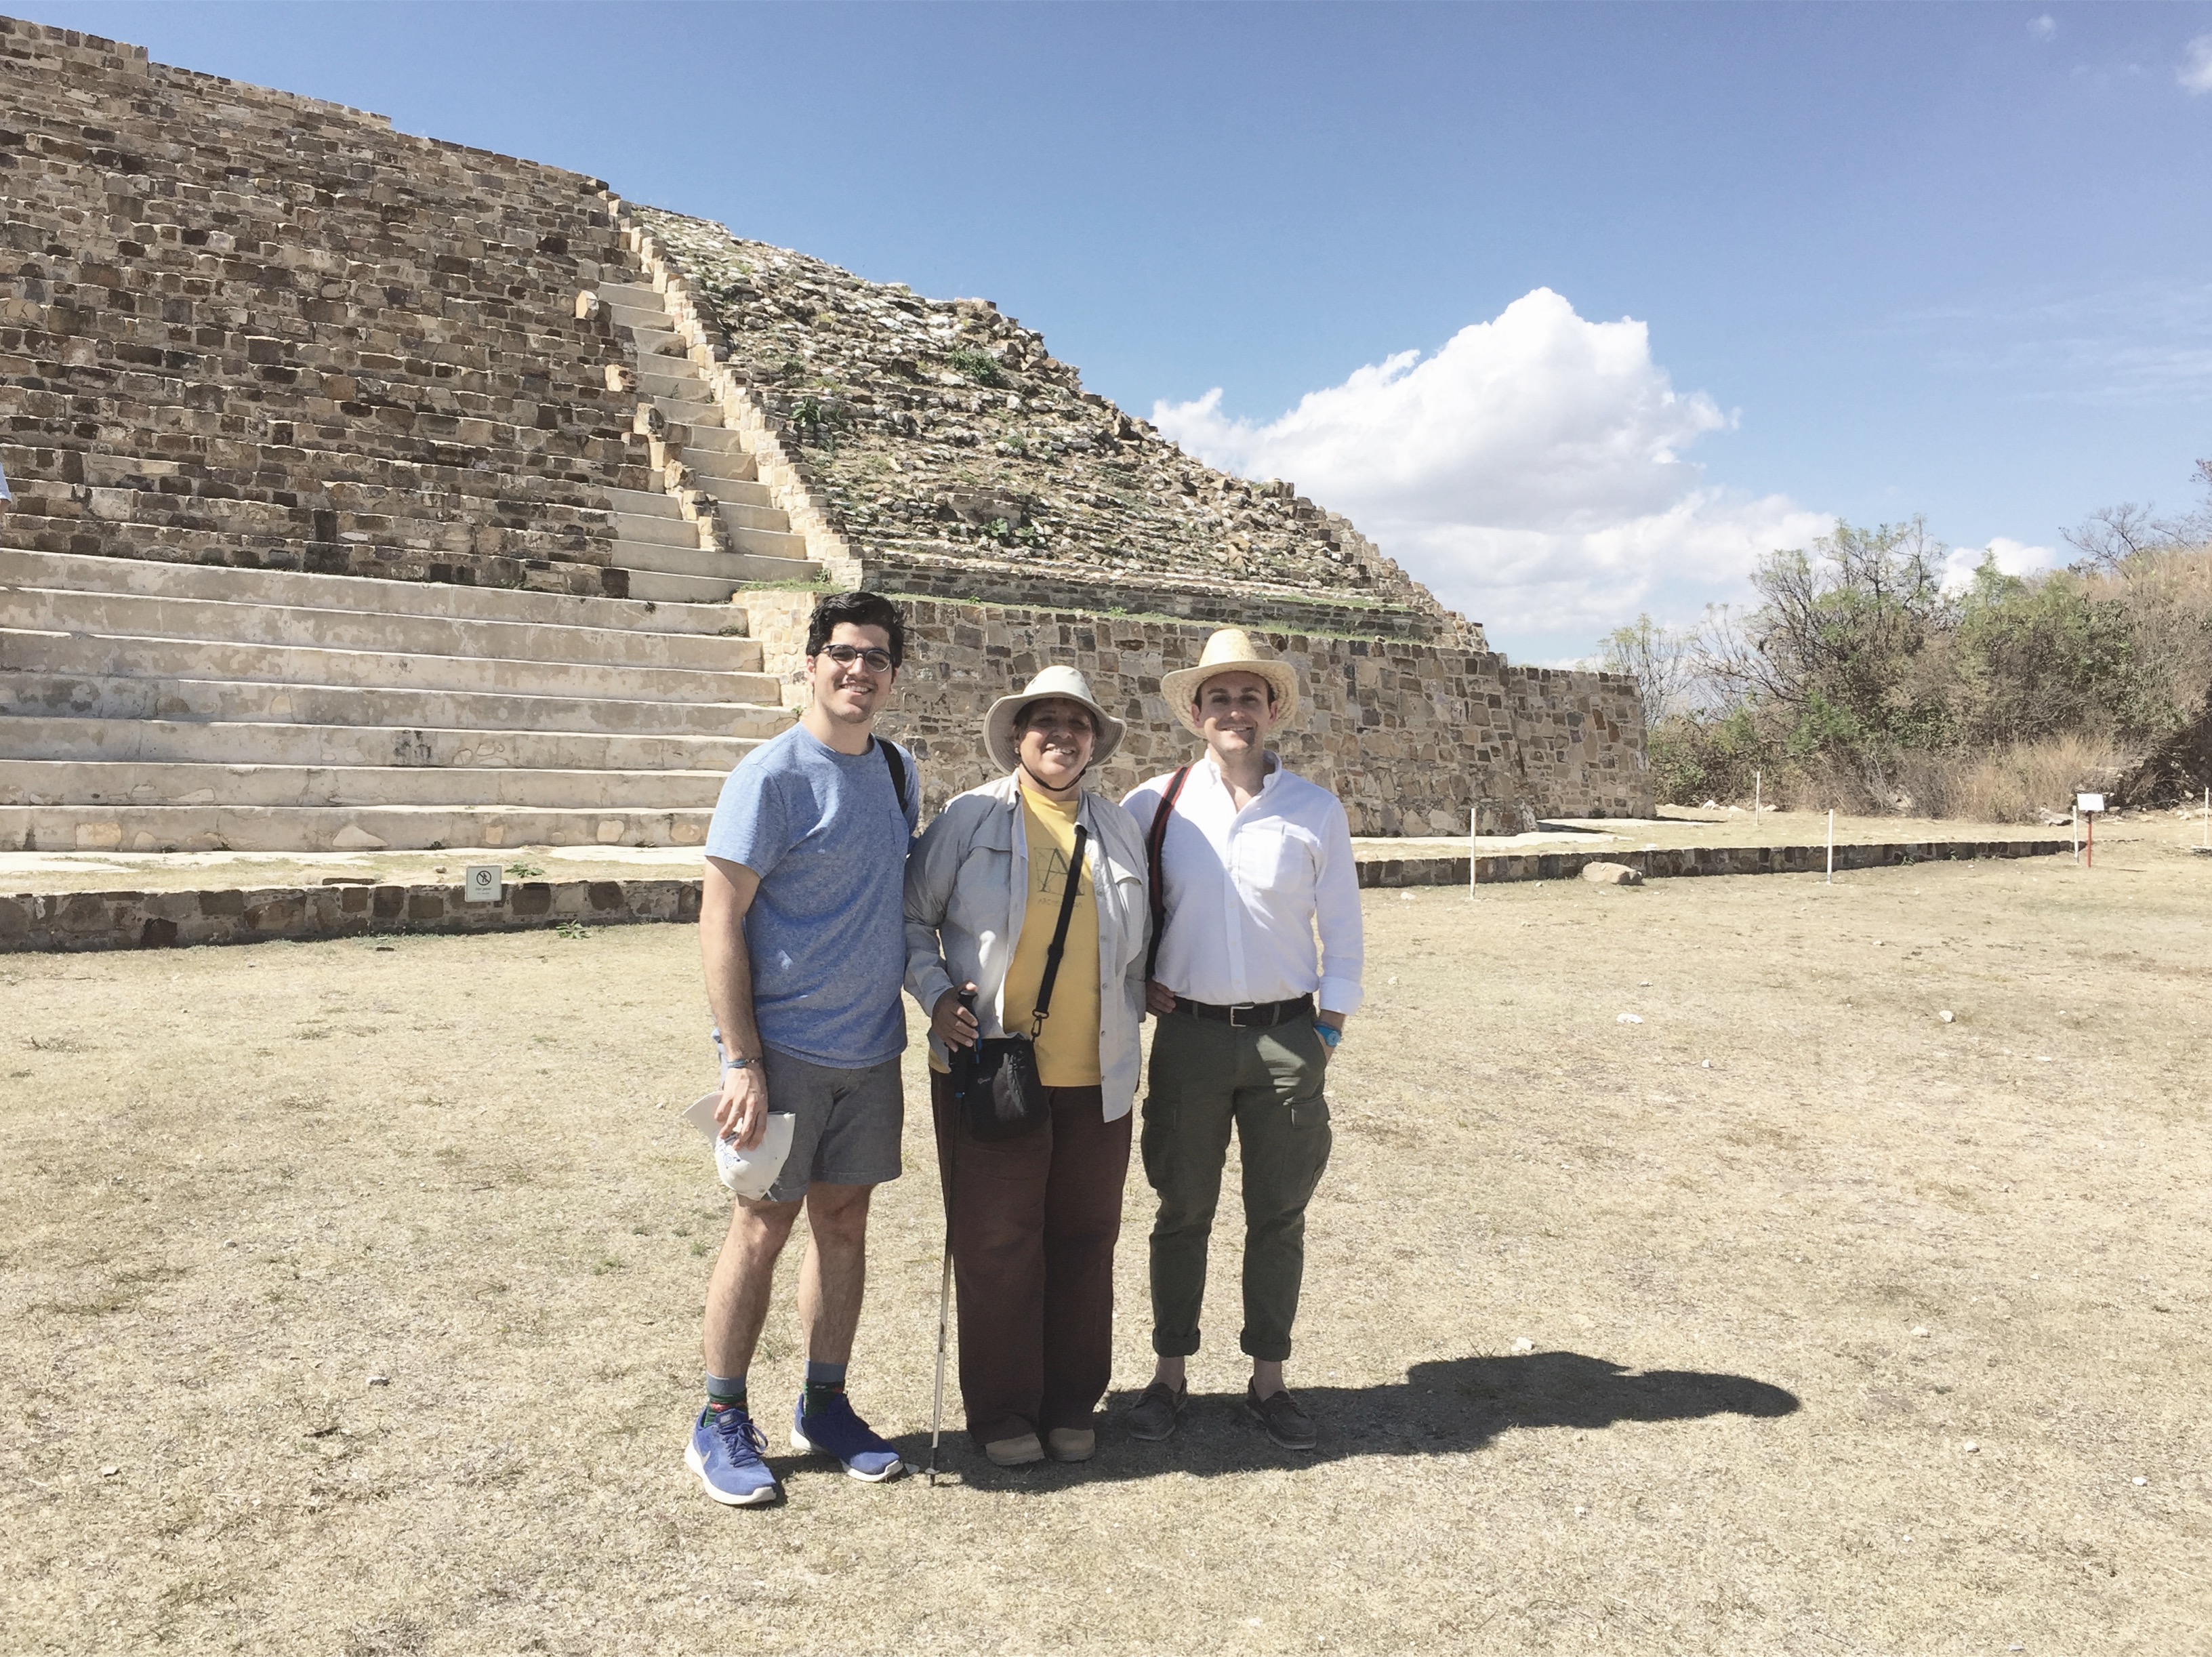 From right to left: Javier Ors Ausín (WMF), Dr. Nelly Robles (Director of Archaeology at Monte Albán), and Kevin Gurley stand in front of one of the pyramids at Atzompa.